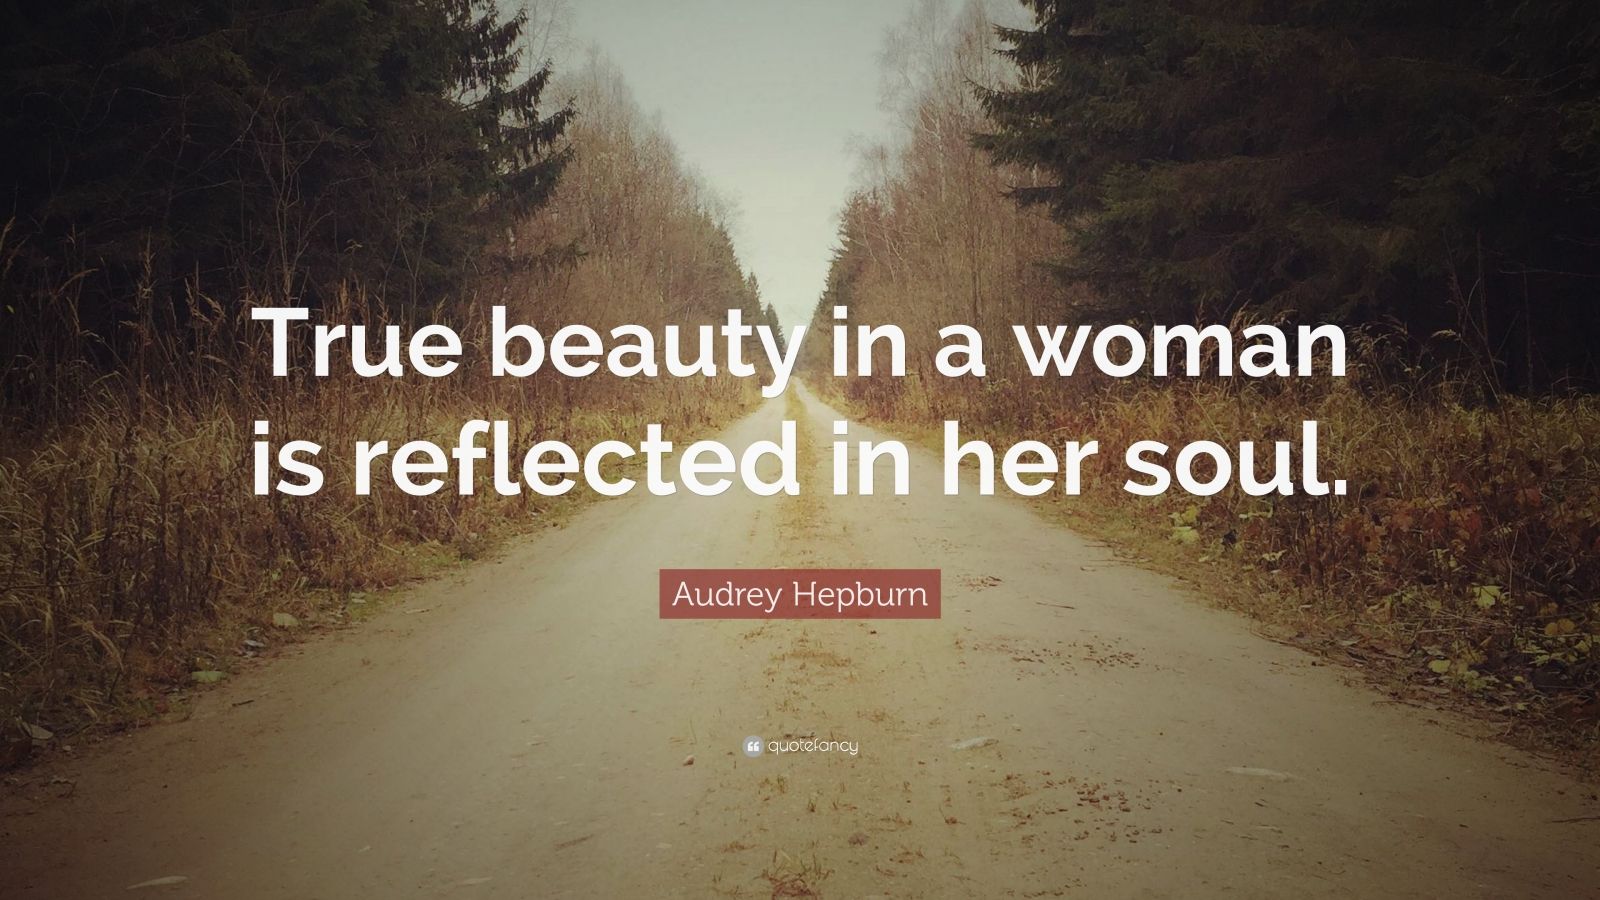 Audrey Hepburn Quote: “True beauty in a woman is reflected in her soul ...